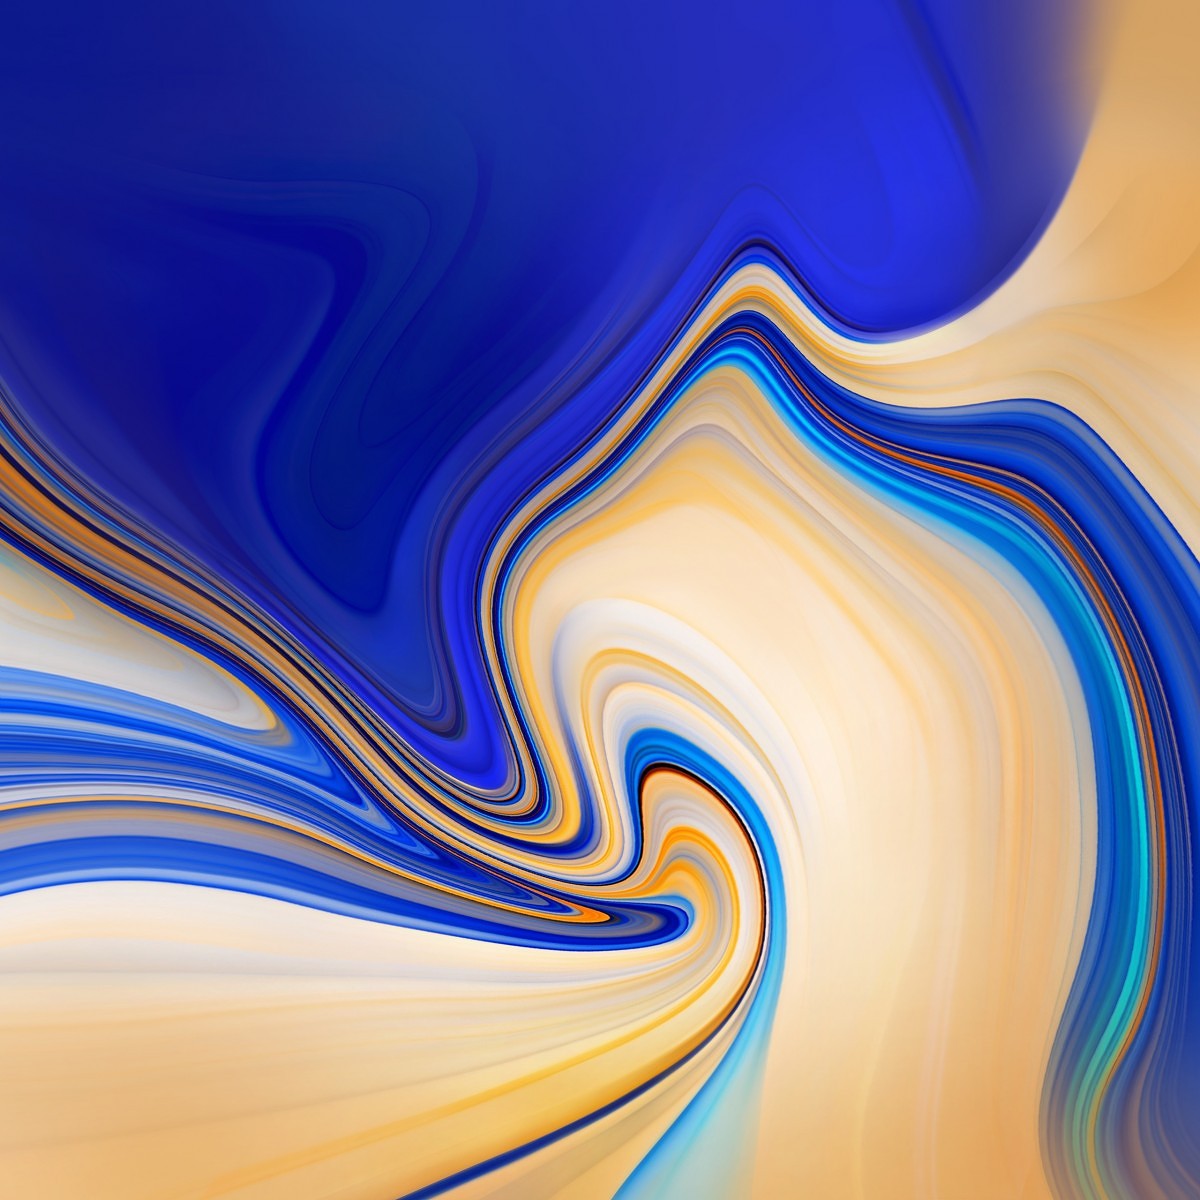 Samsung Galaxy Note Wallpaper Now Available For